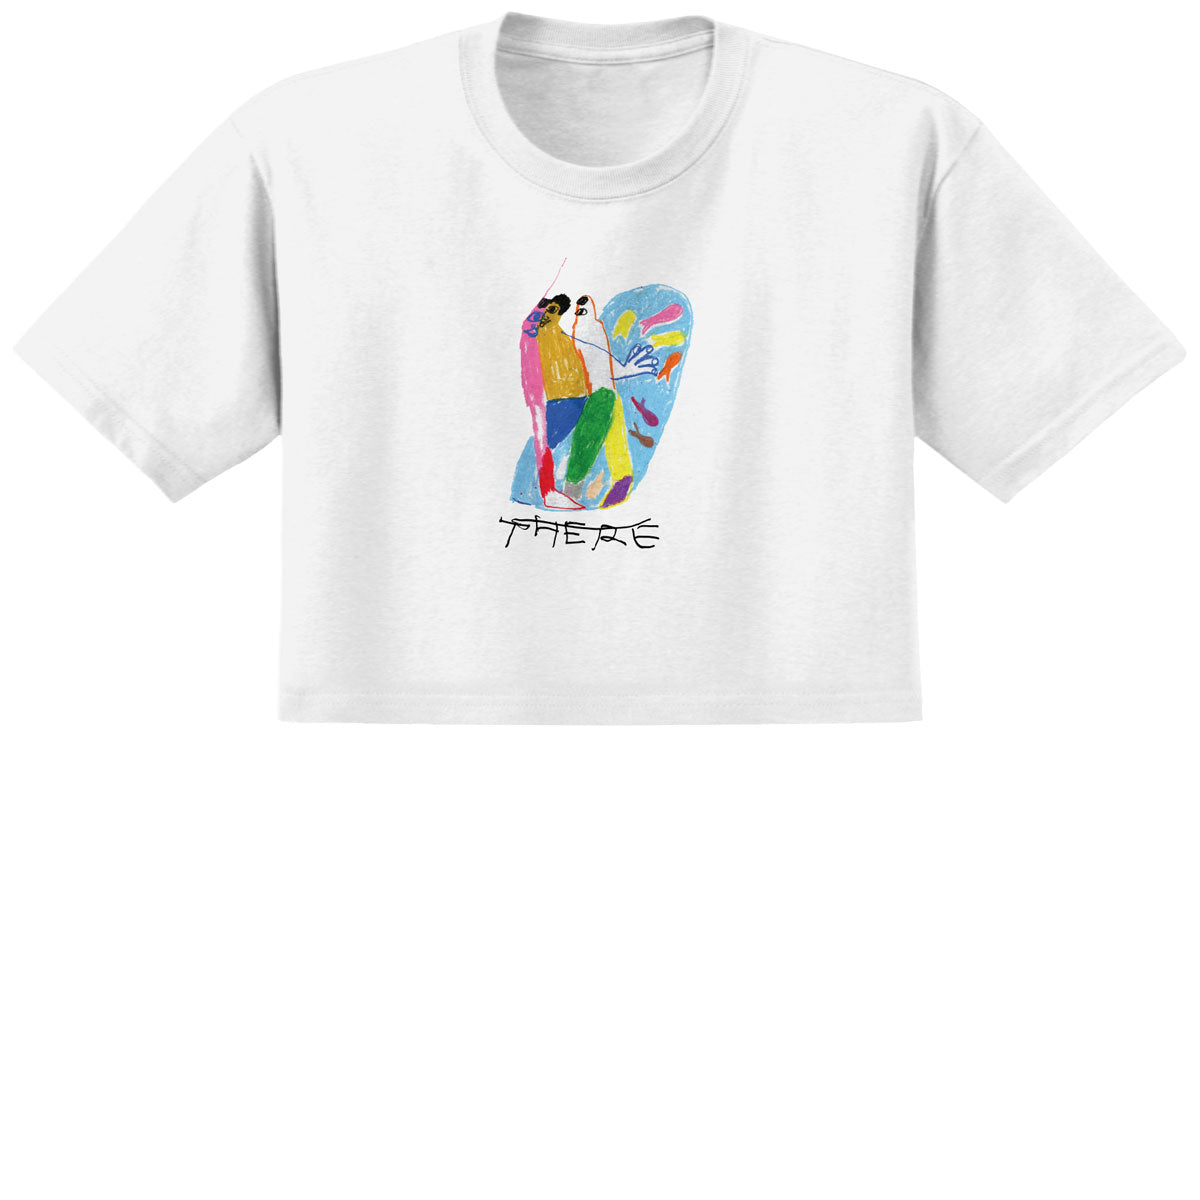 There Pond T-Shirt - White/Multi Color image 1